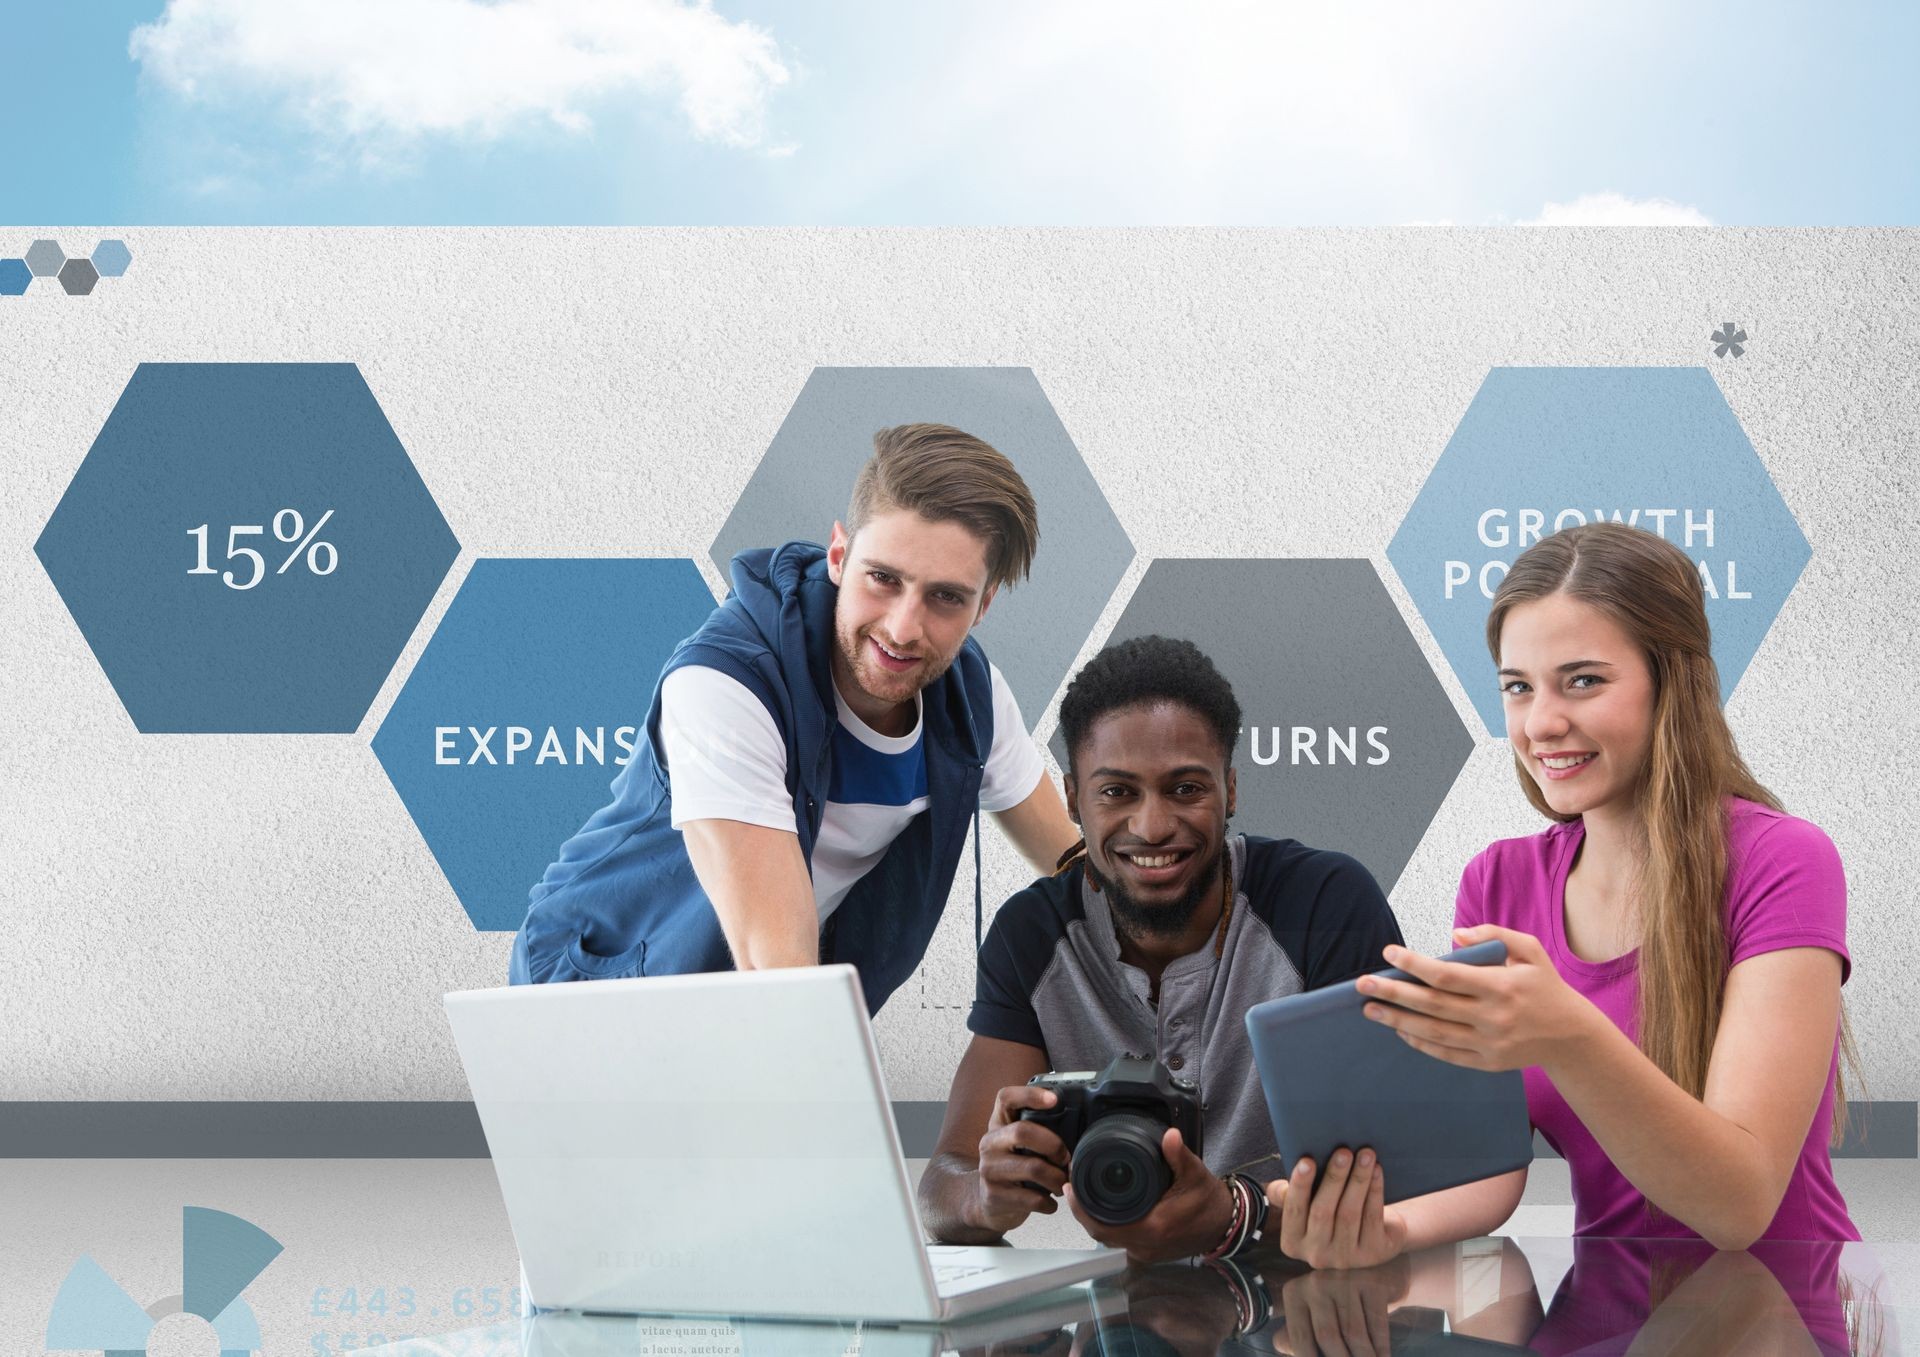 Digital composite of Group of young people on computer with camera in front of business graphics